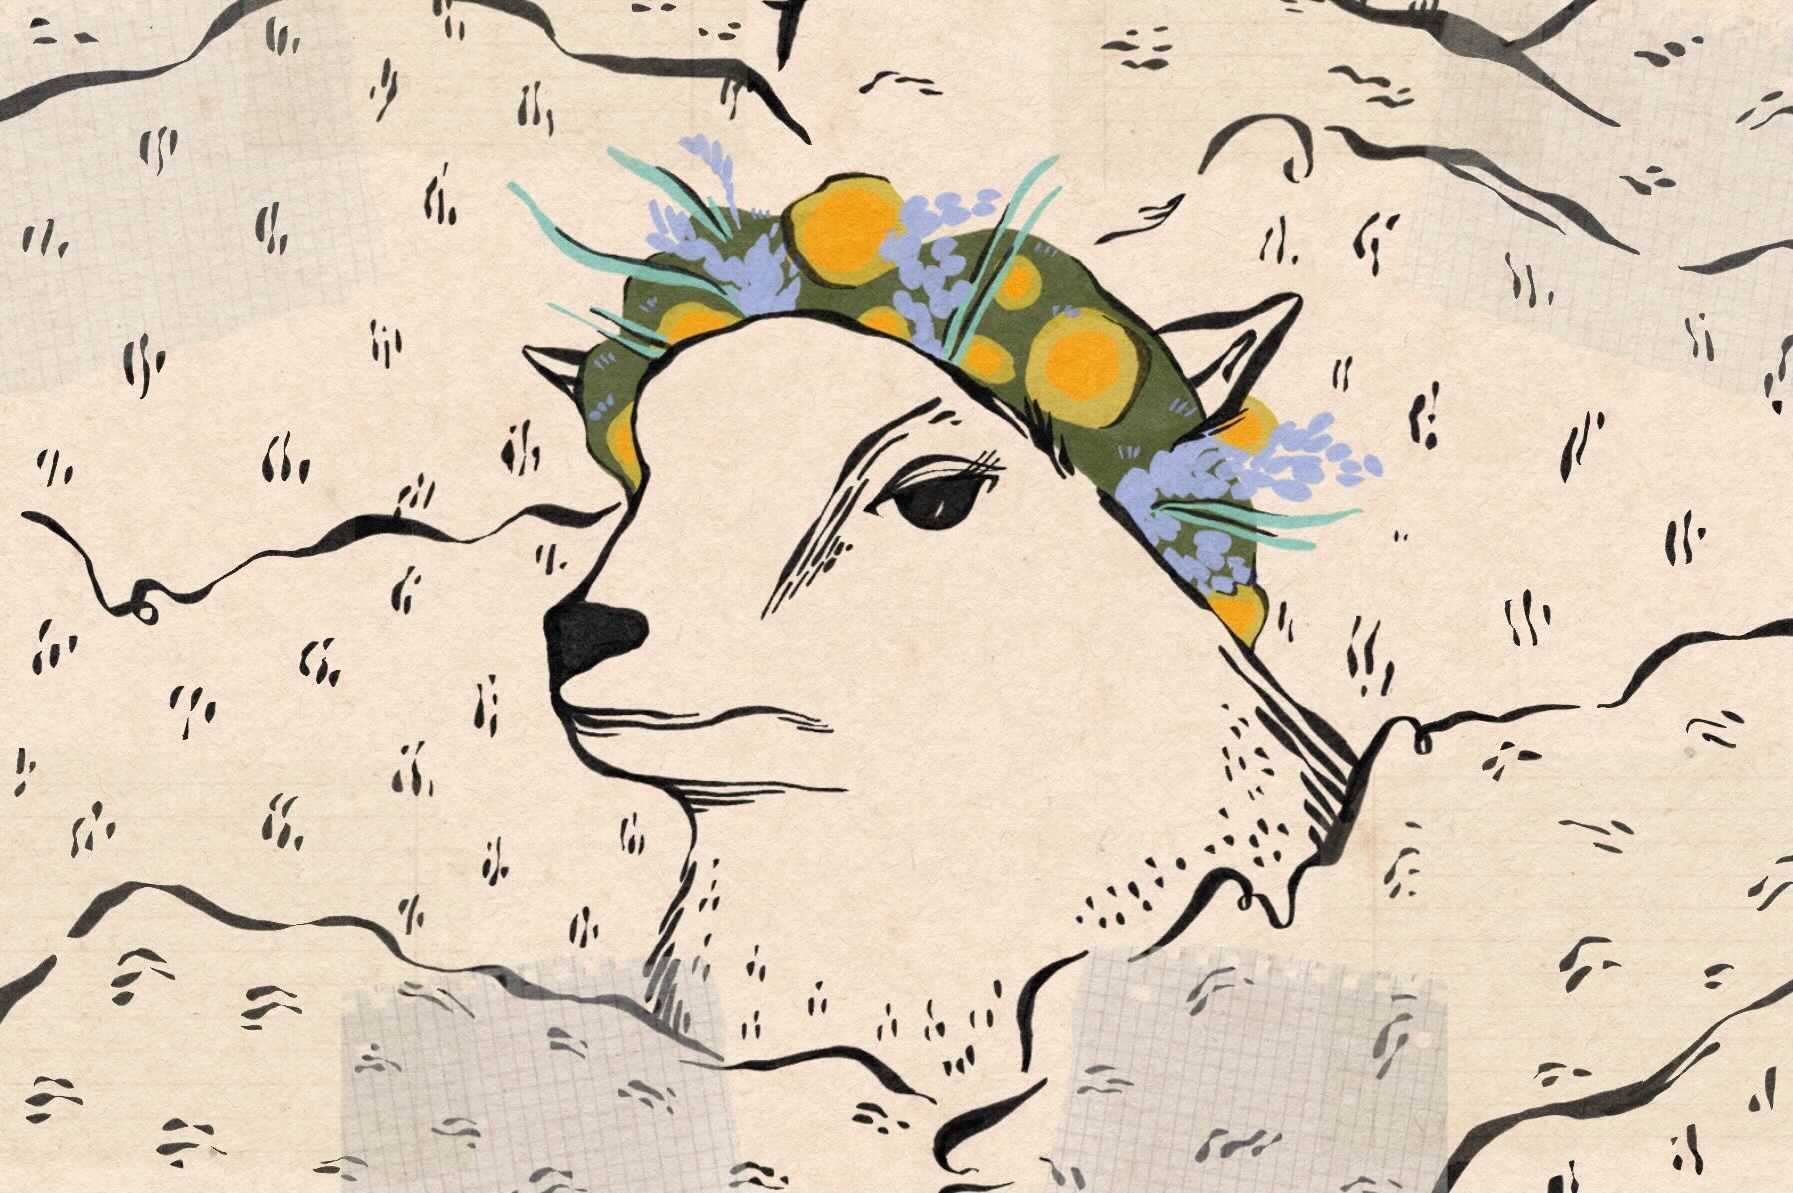 Lamb with a crown of flowers